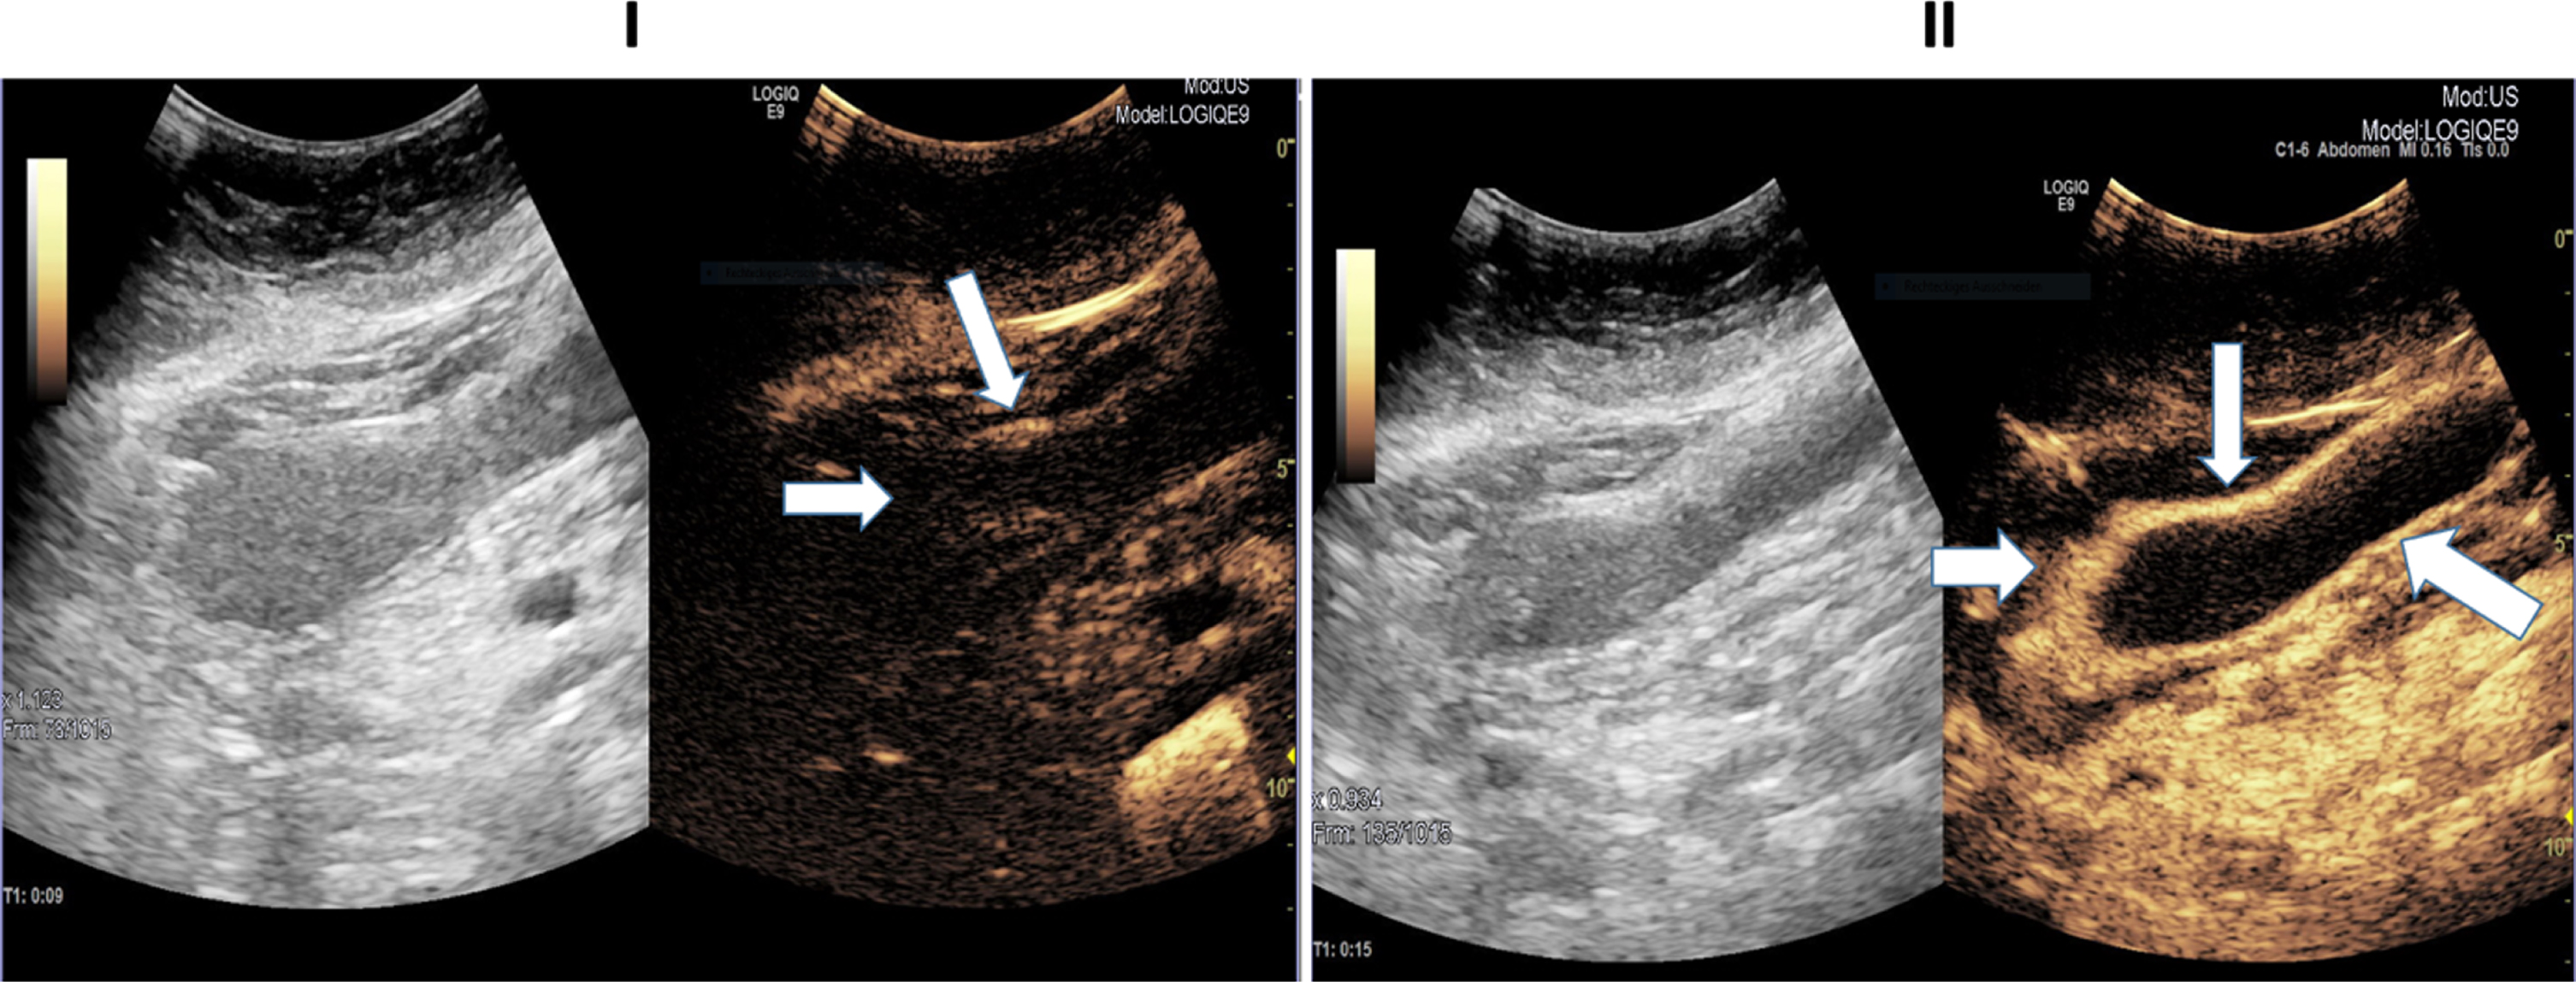 Ultrasound images of a 45-year-old patient with severe COVID-19 disease. I: B Mode ultrasound showing intestinal wall thickening; CEUS image showing mild arterial enhancement 9 seconds after SonoVue application (white arrows). II: CEUS image showing early and strong arterial hyperenhancement of the intestinal wall (white arrow) 15 seconds after SonoVue application.